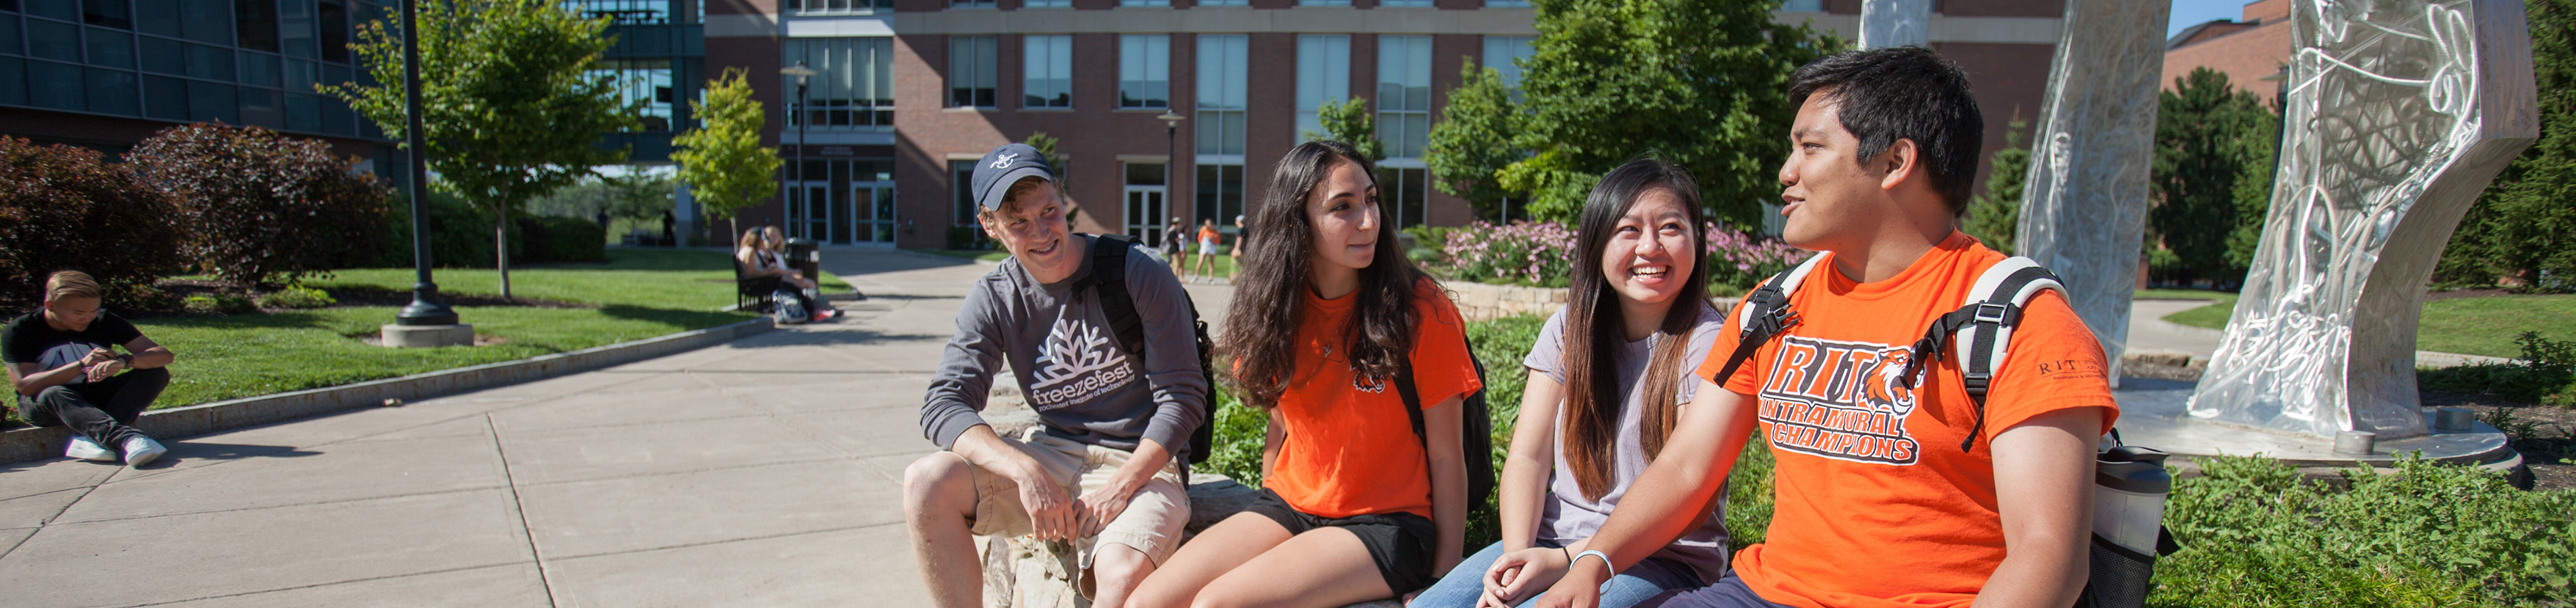 4 diverse students hanging out in Infinity Quad.